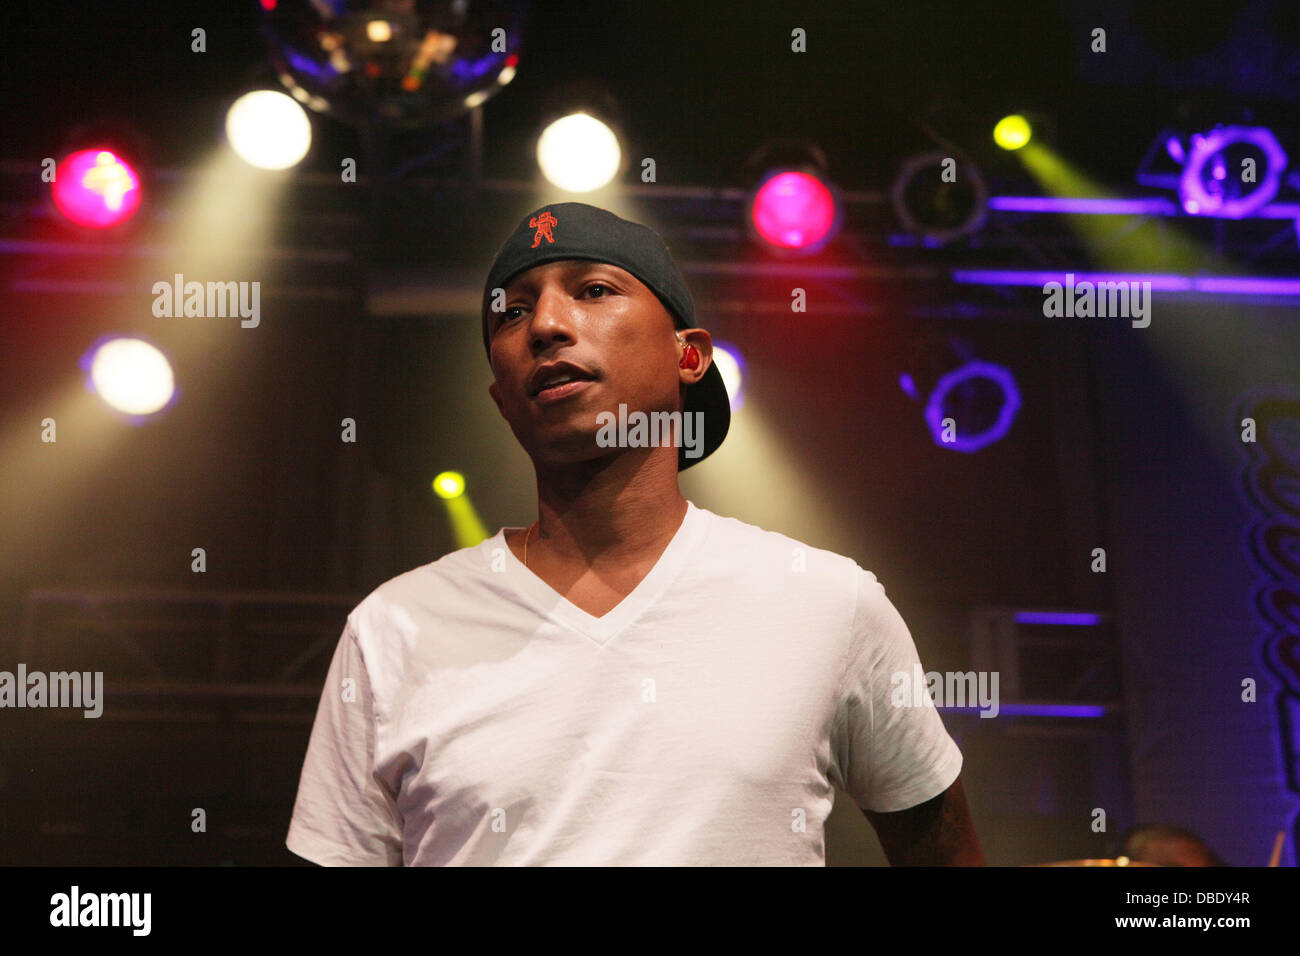 Pharrell Williams of N.E.R.D. 'Coors Light Search for the Coldest' national competition and tour stops held at Highline Ballroom New York City, USA - 31.05.11 Stock Photo